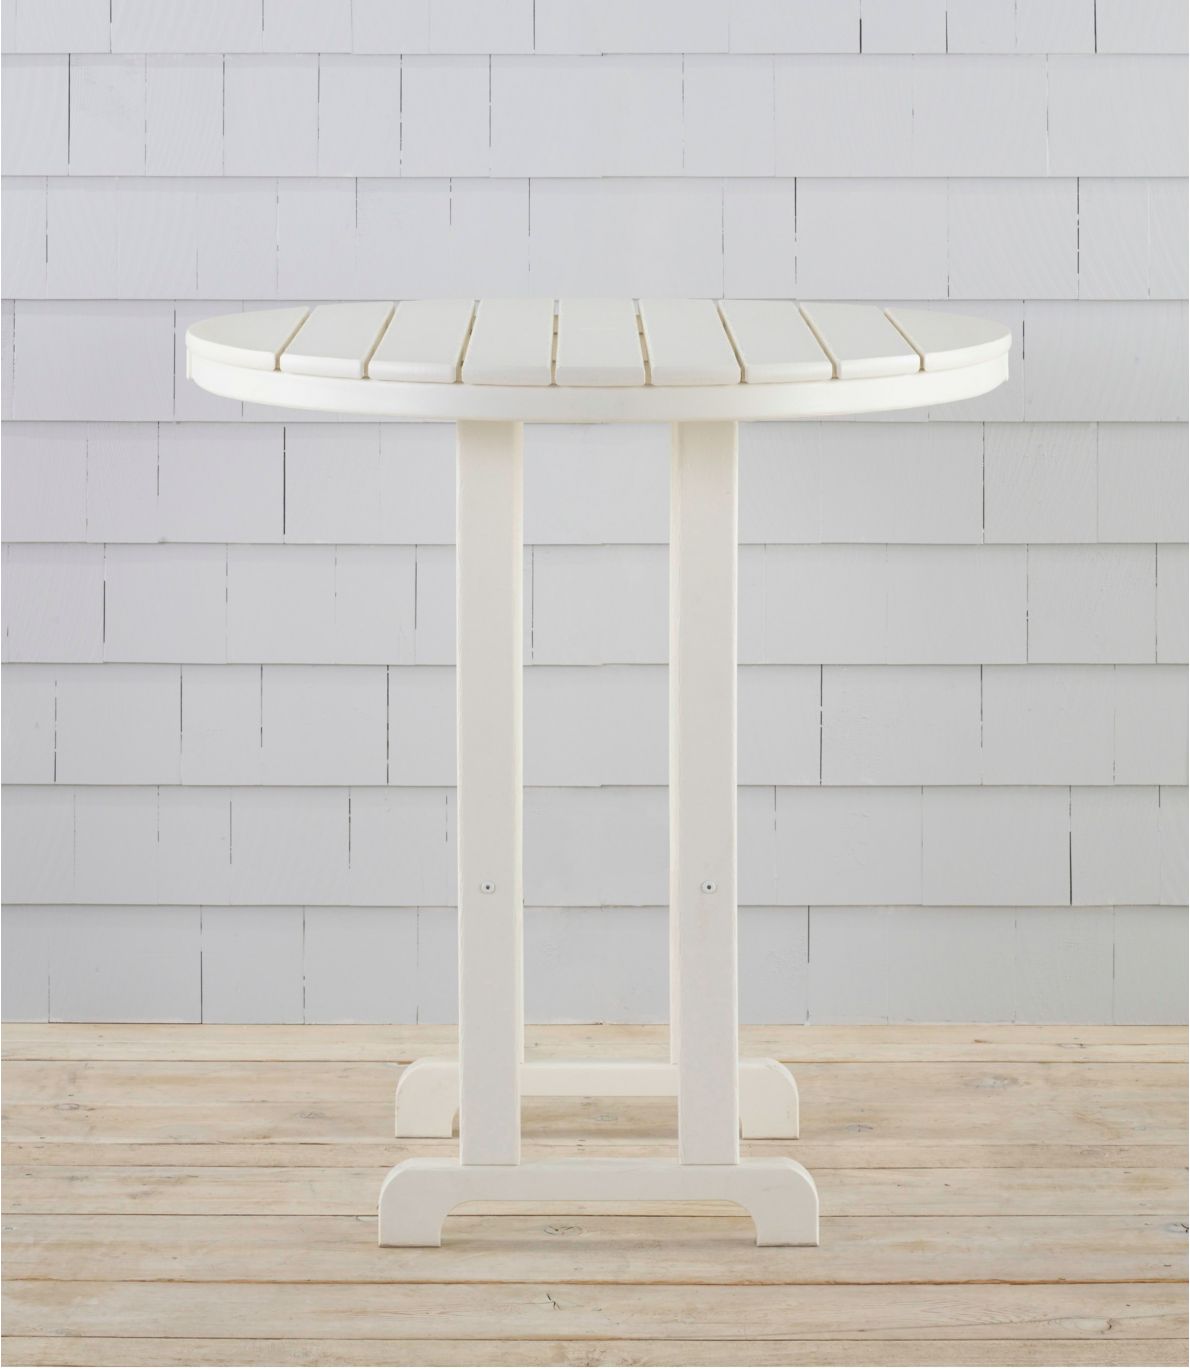 All-Weather Counter-Height Table, 36" Round